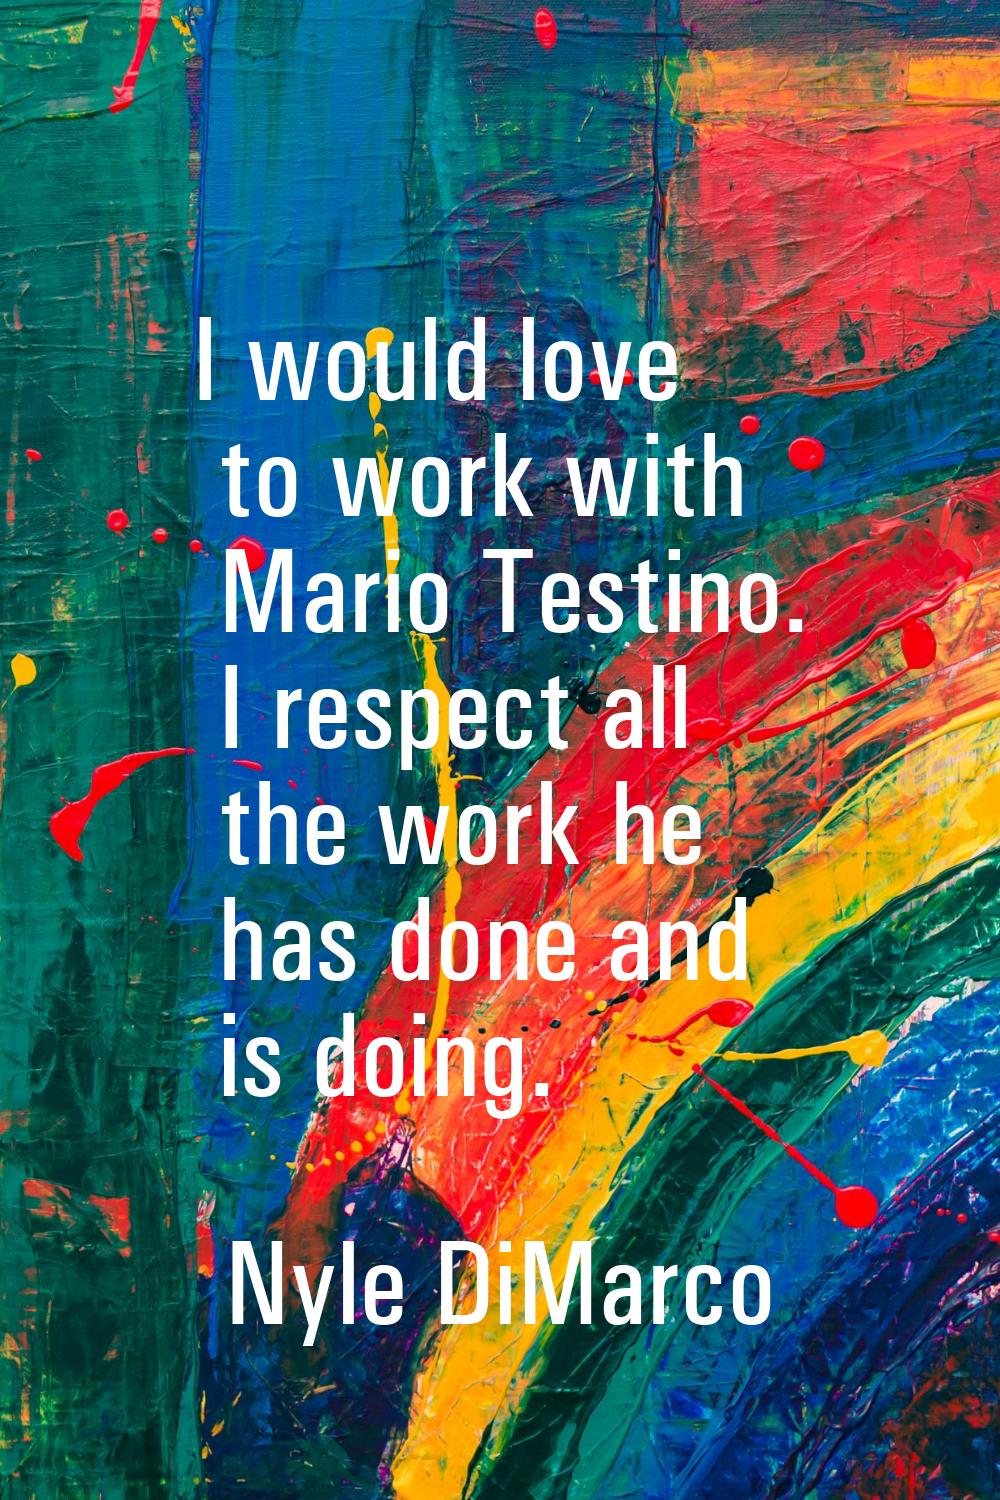 I would love to work with Mario Testino. I respect all the work he has done and is doing.